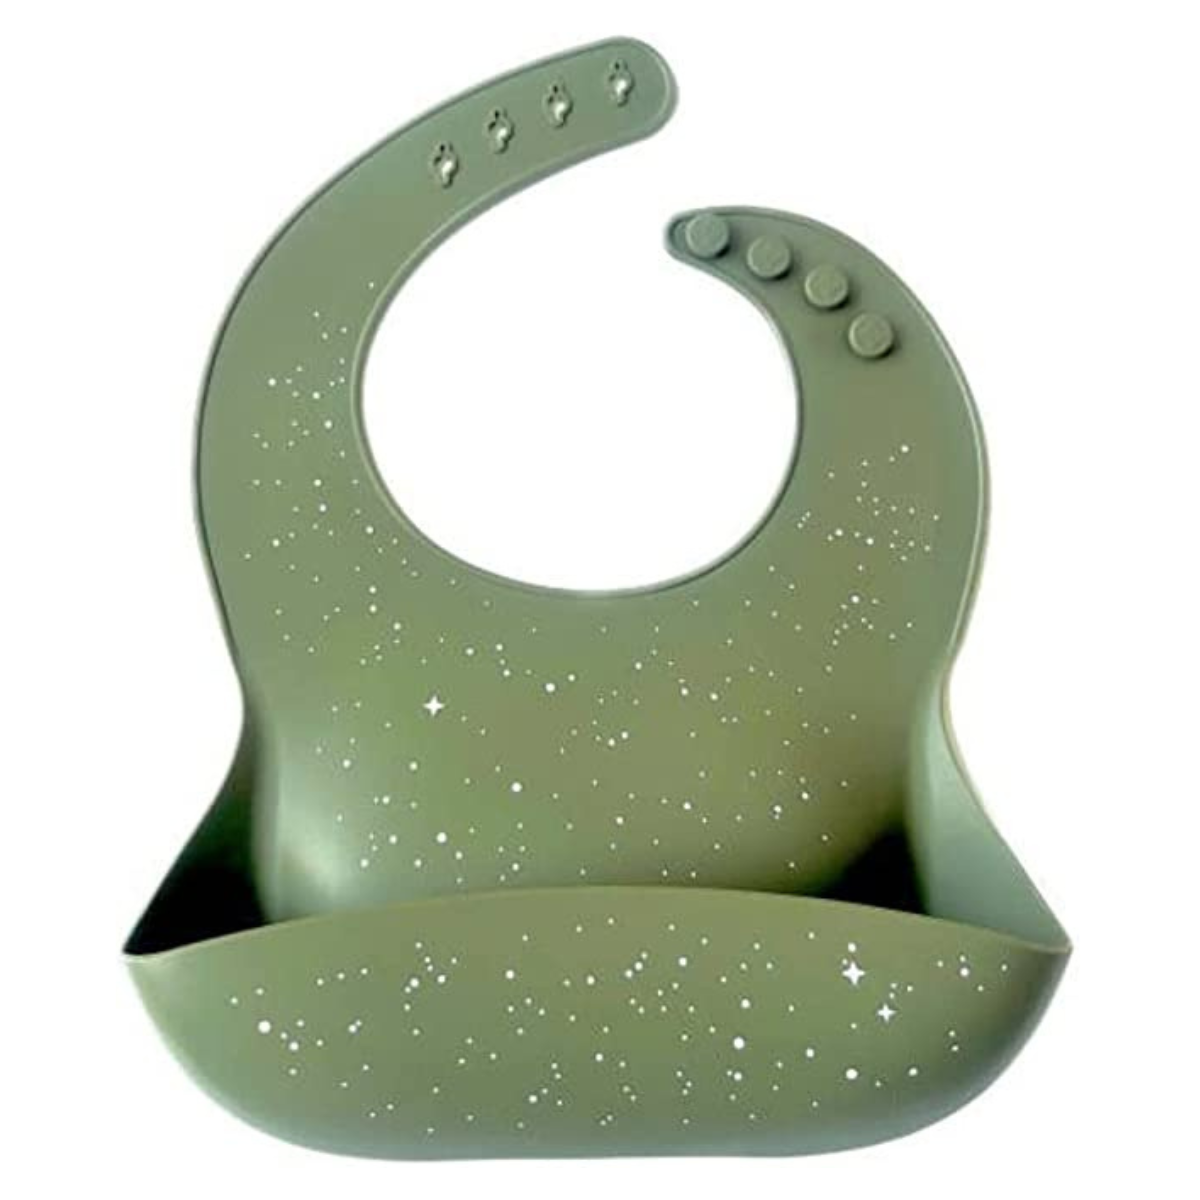 Silicone Baby Bibs - Waterproof and Adjustable Feeding Bib - Easy to Clean Material - Made from High-Quality Food Grade Silicone